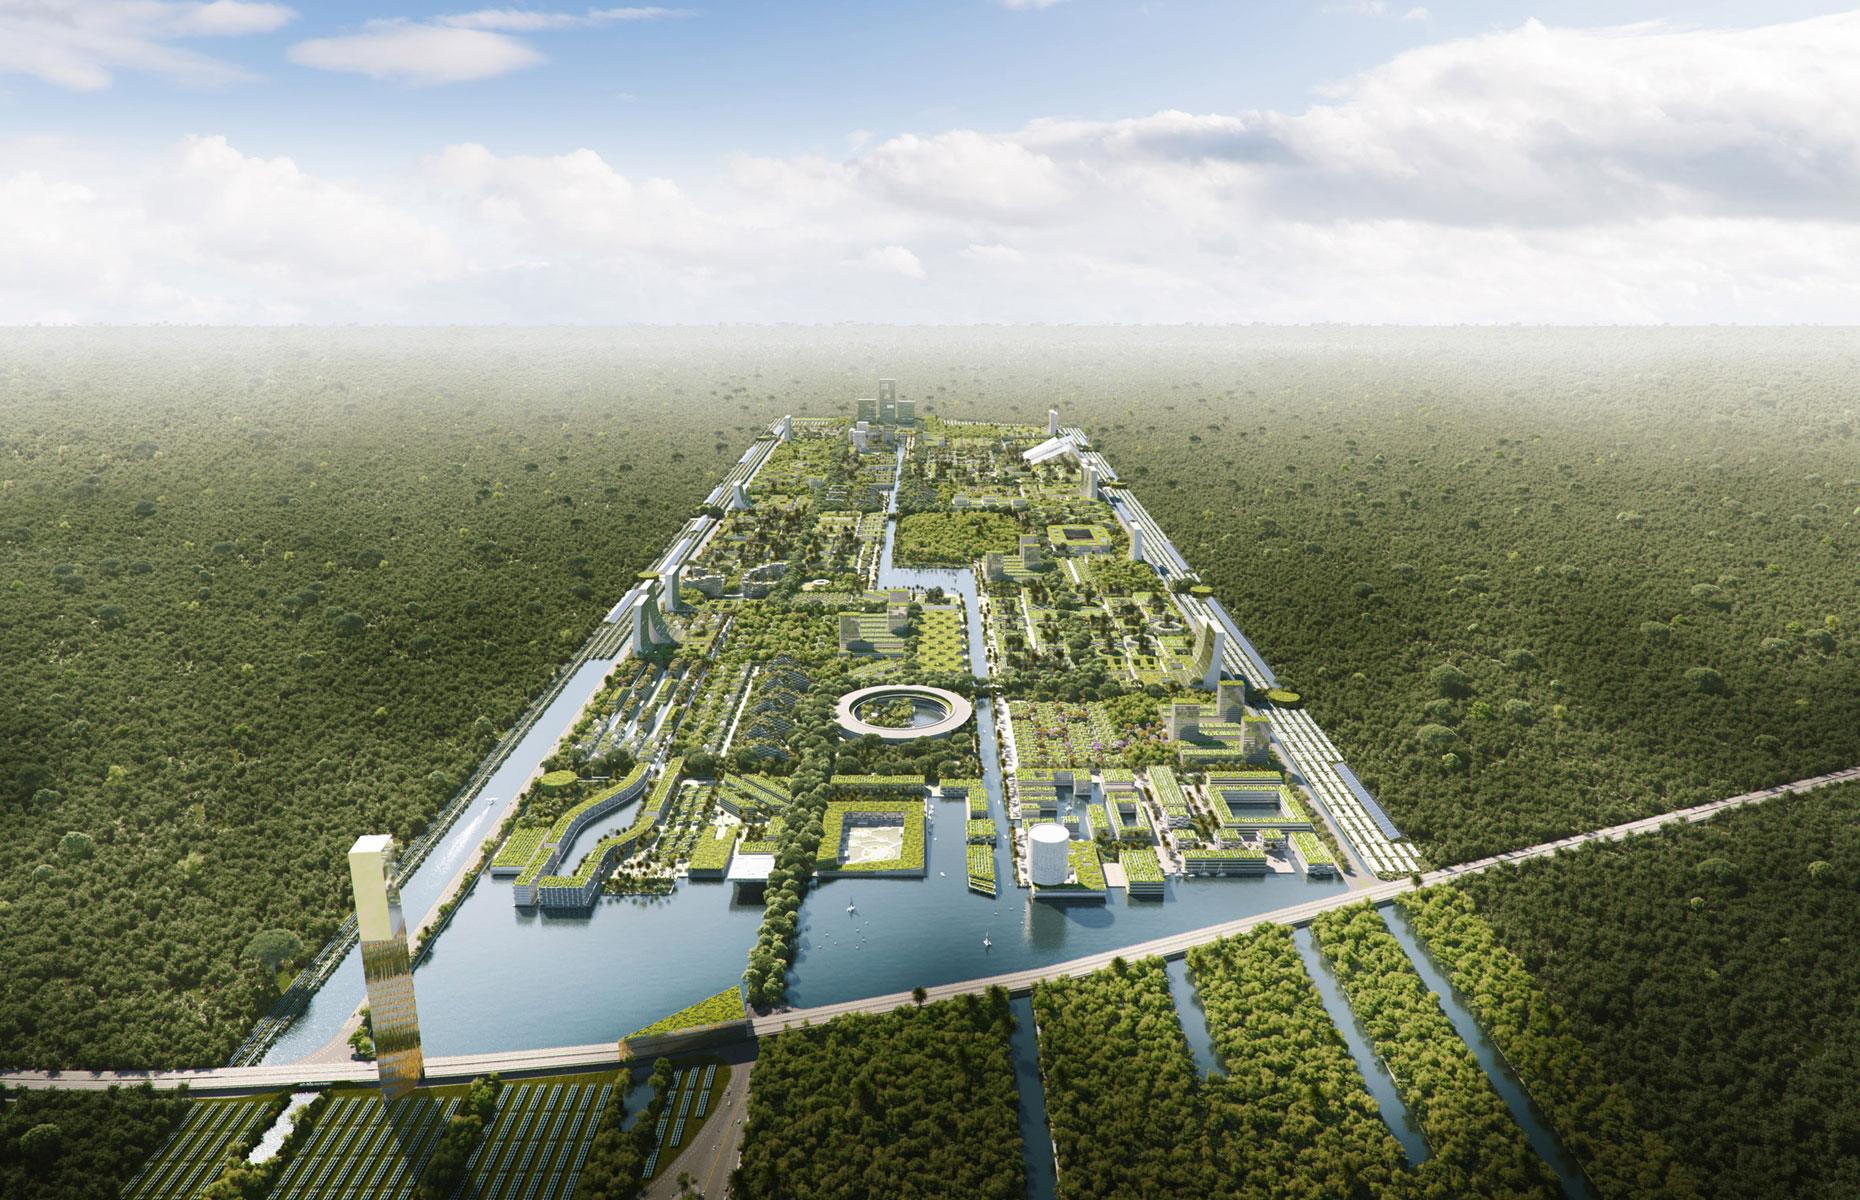 <p>Boeri describes Smart Forest City as “a botanical garden within a contemporary city, based on Mayan heritage and in its relationship with the natural and sacred world.” Over 60% of the 1,376-acre city, which will be built on land previously earmarked for a shopping mall, will feature green spaces resplendent with an incredible 120,000 plants from 350 species.</p>